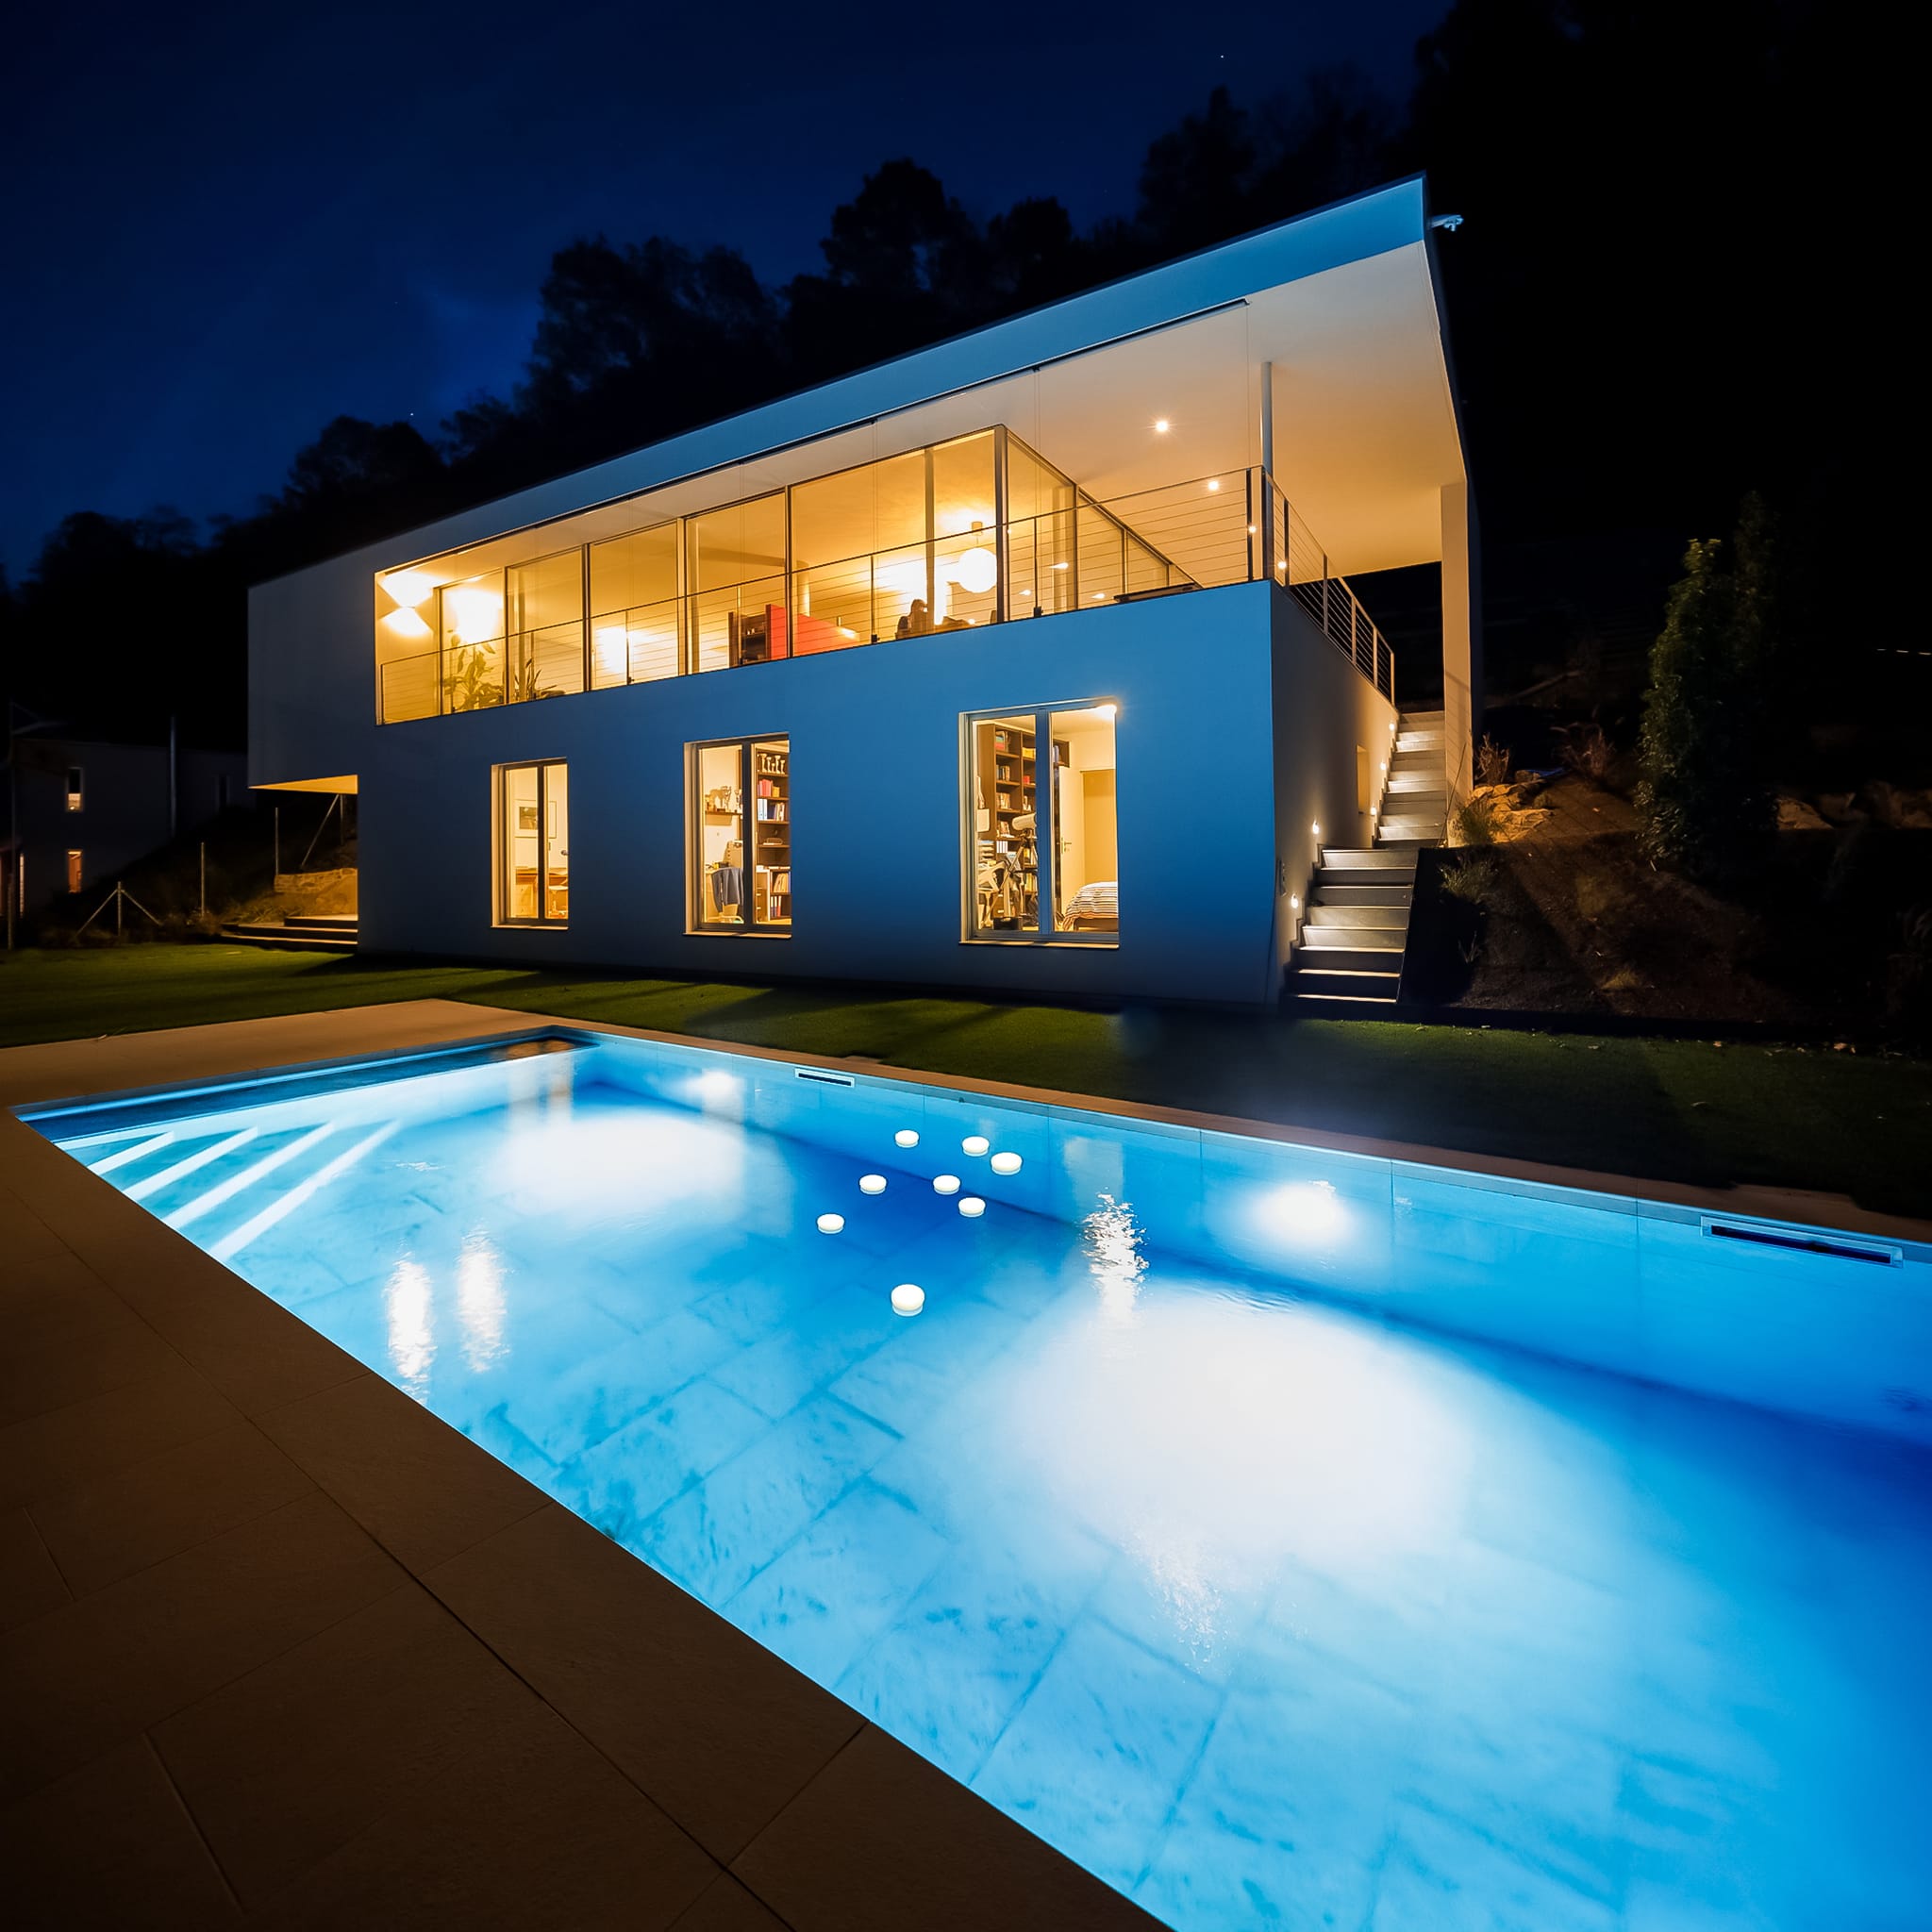 Papaya 12 BATTERY: not just a pool light, but a versatile, waterproof, and colorful lighting solution for any pool or garden area.